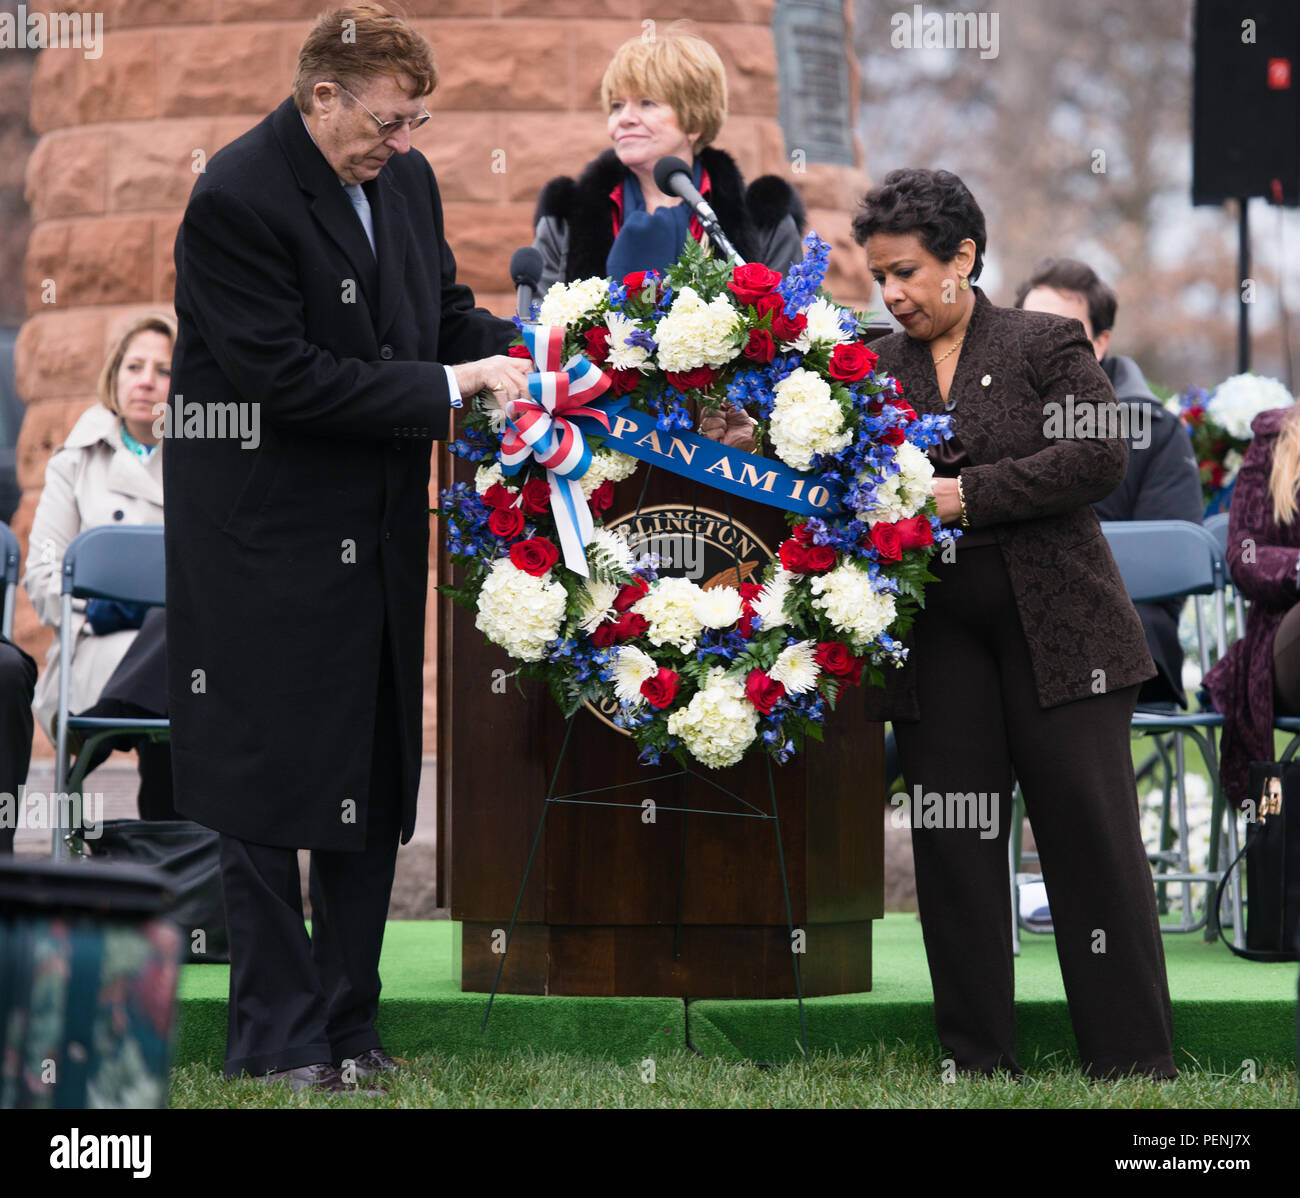 Frank Duggan, left, Victims of Pan Am Flight 103 president, and Loretta Lynch, right, Attorney General of the United States, pick up a wreath to place on the Pan Am Flight 103 memorial in Arlington National Cemetery, Dec. 21, 2015, in Arlington, Va. A terrorist’s bomb destroyed the aircraft 27 years ago, in what became known as the “Lockerbie bombing,” killing 243 passengers, 16 crew members and 11 people on the ground. (U.S. Army photo by Rachel Larue/Arlington National Cemetery/released) Stock Photo